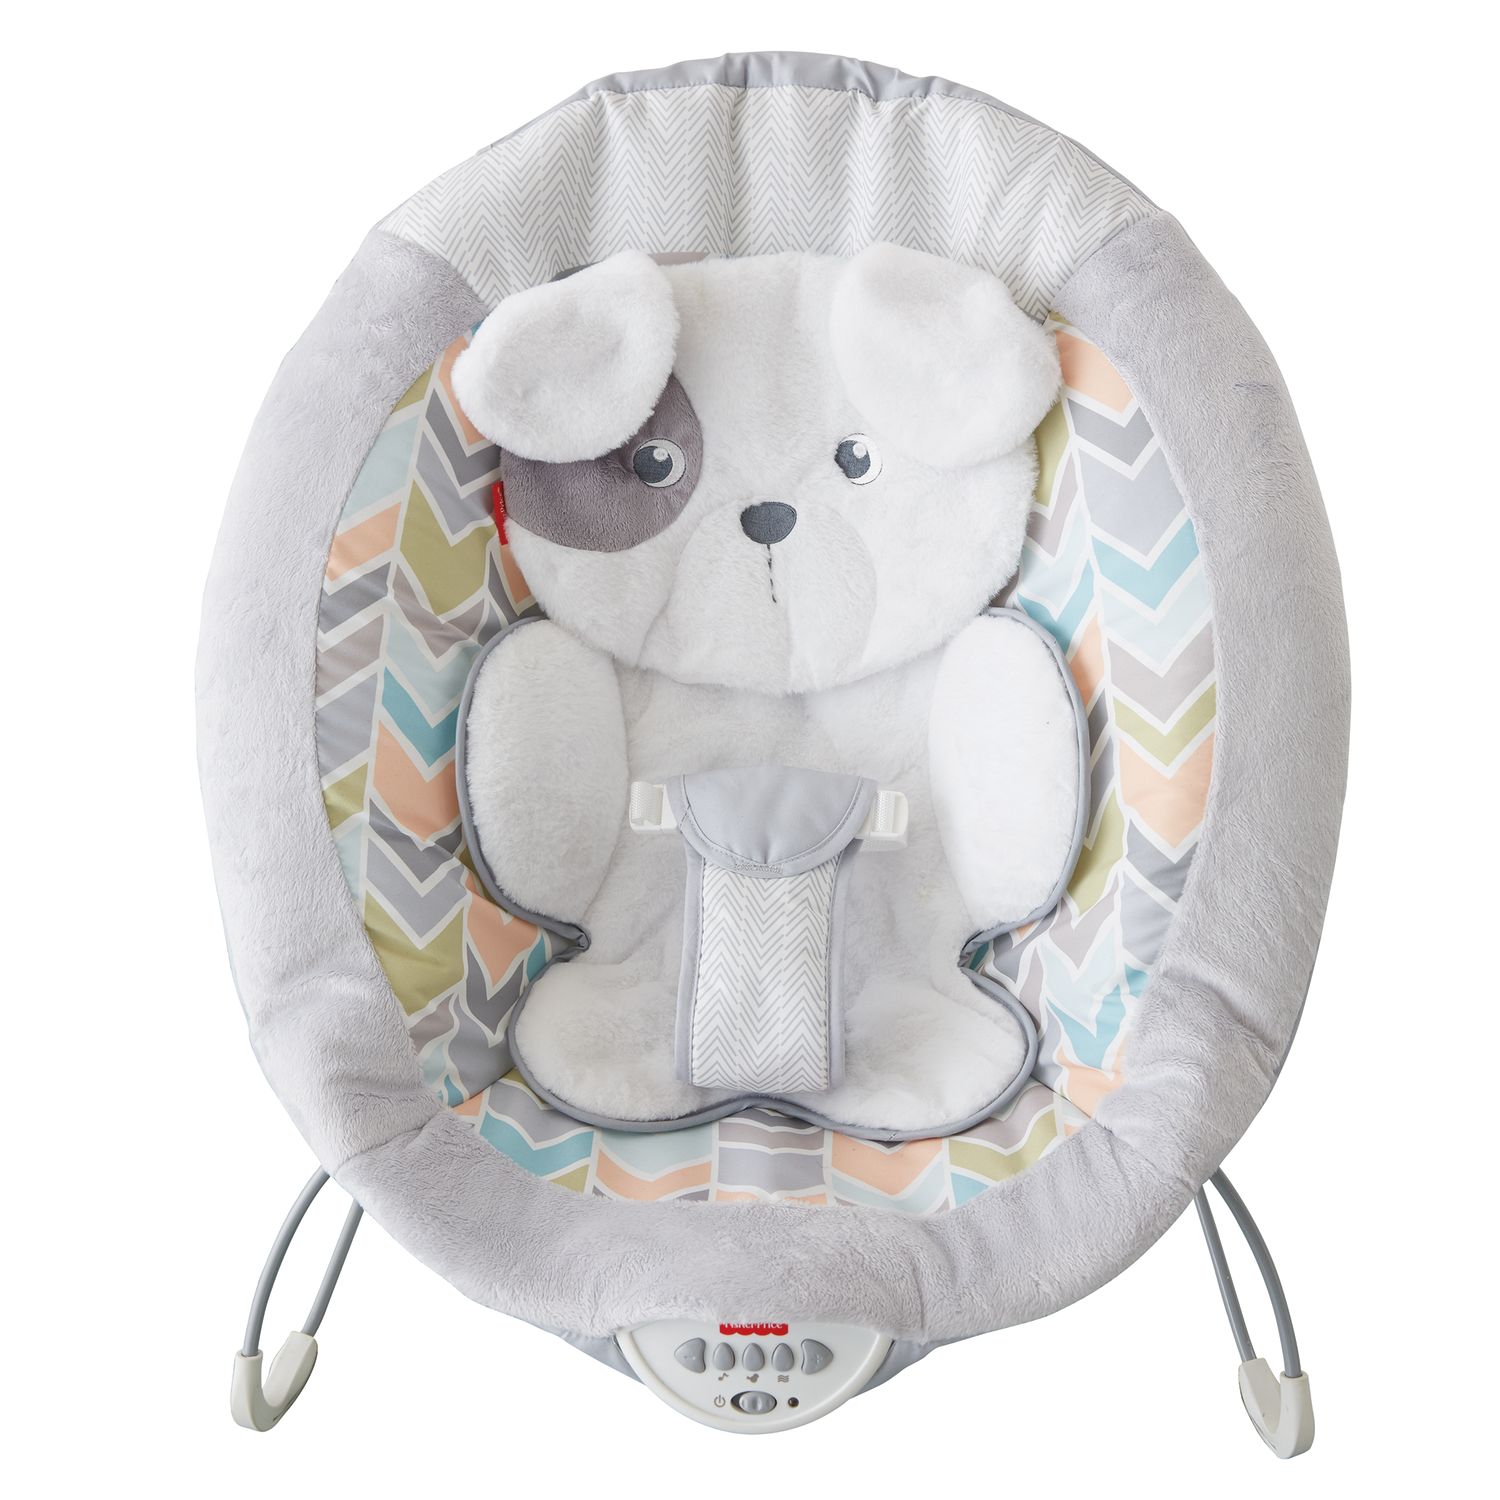 fisher price bouncer bear